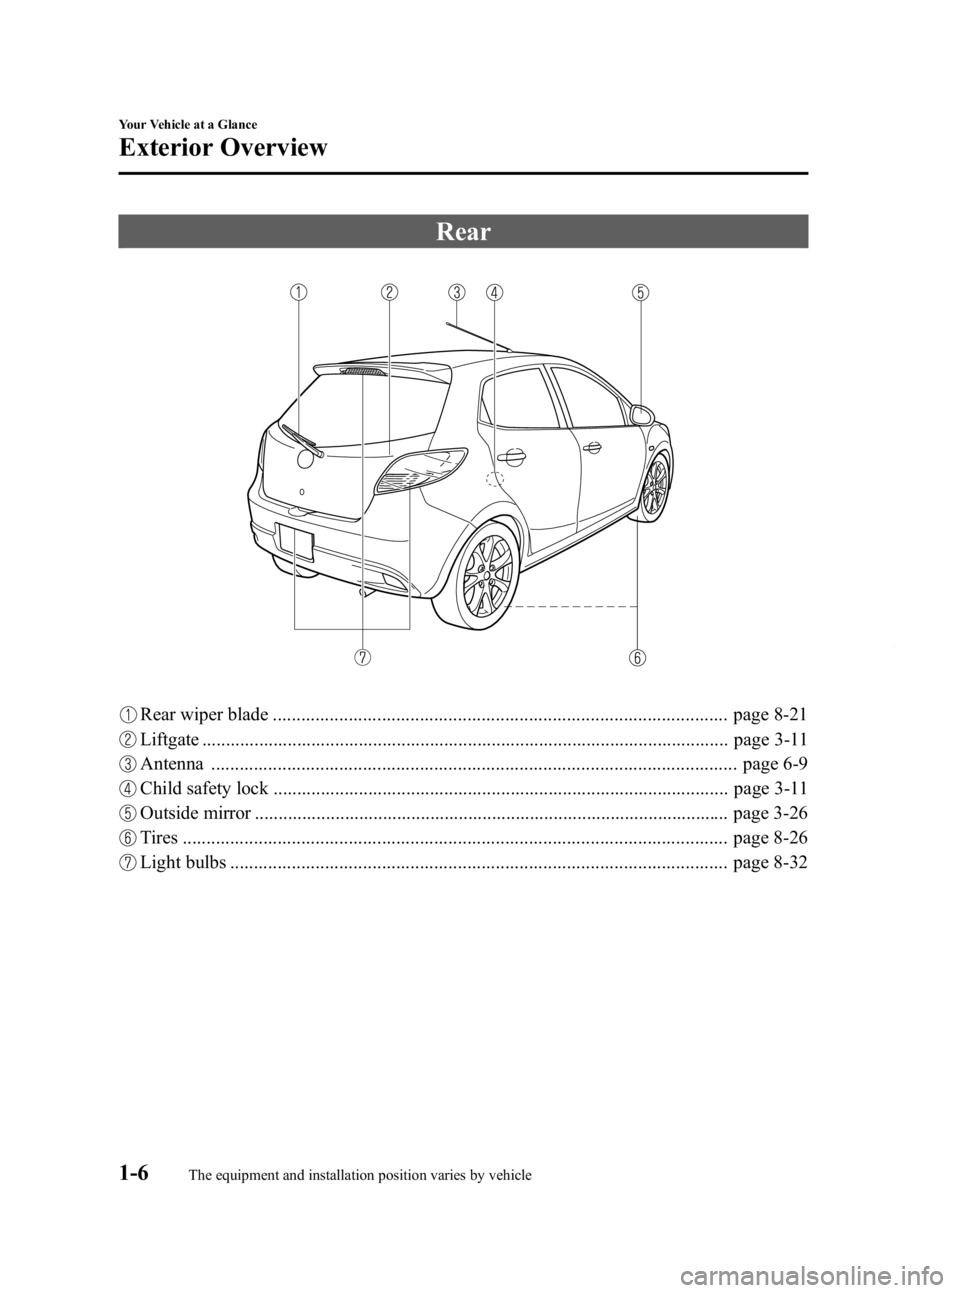 MAZDA MODEL 2 2012  Owners Manual Black plate (12,1)
Rear
Rear wiper blade ................................................................................................ page 8-21
Liftgate ...........................................